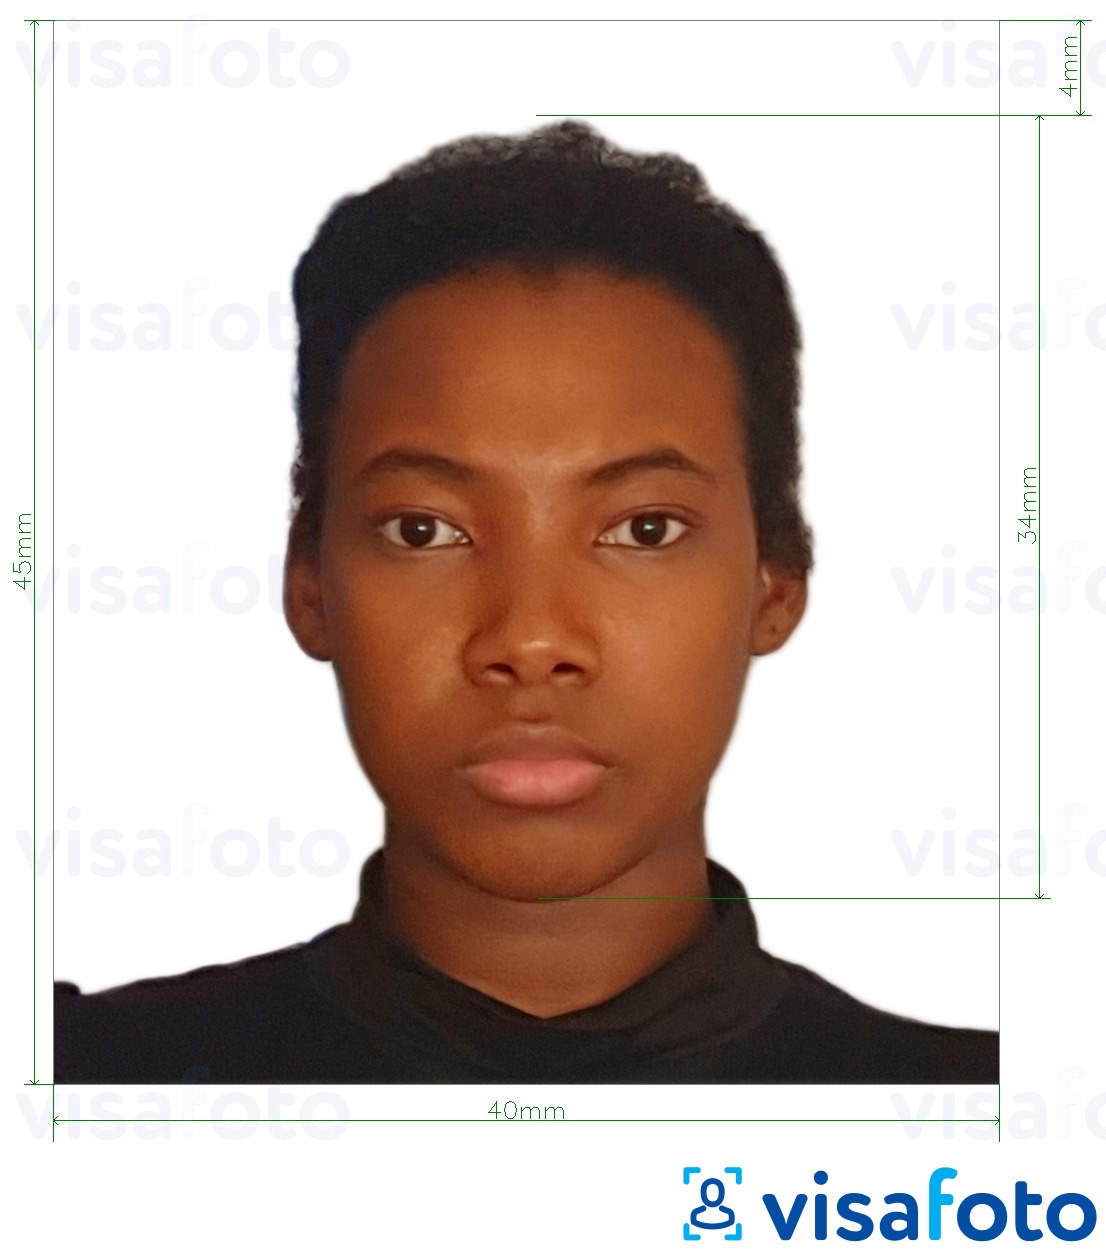 Example of photo for Tanzania visa 40x45 mm (4x4.5 cm) with exact size specification